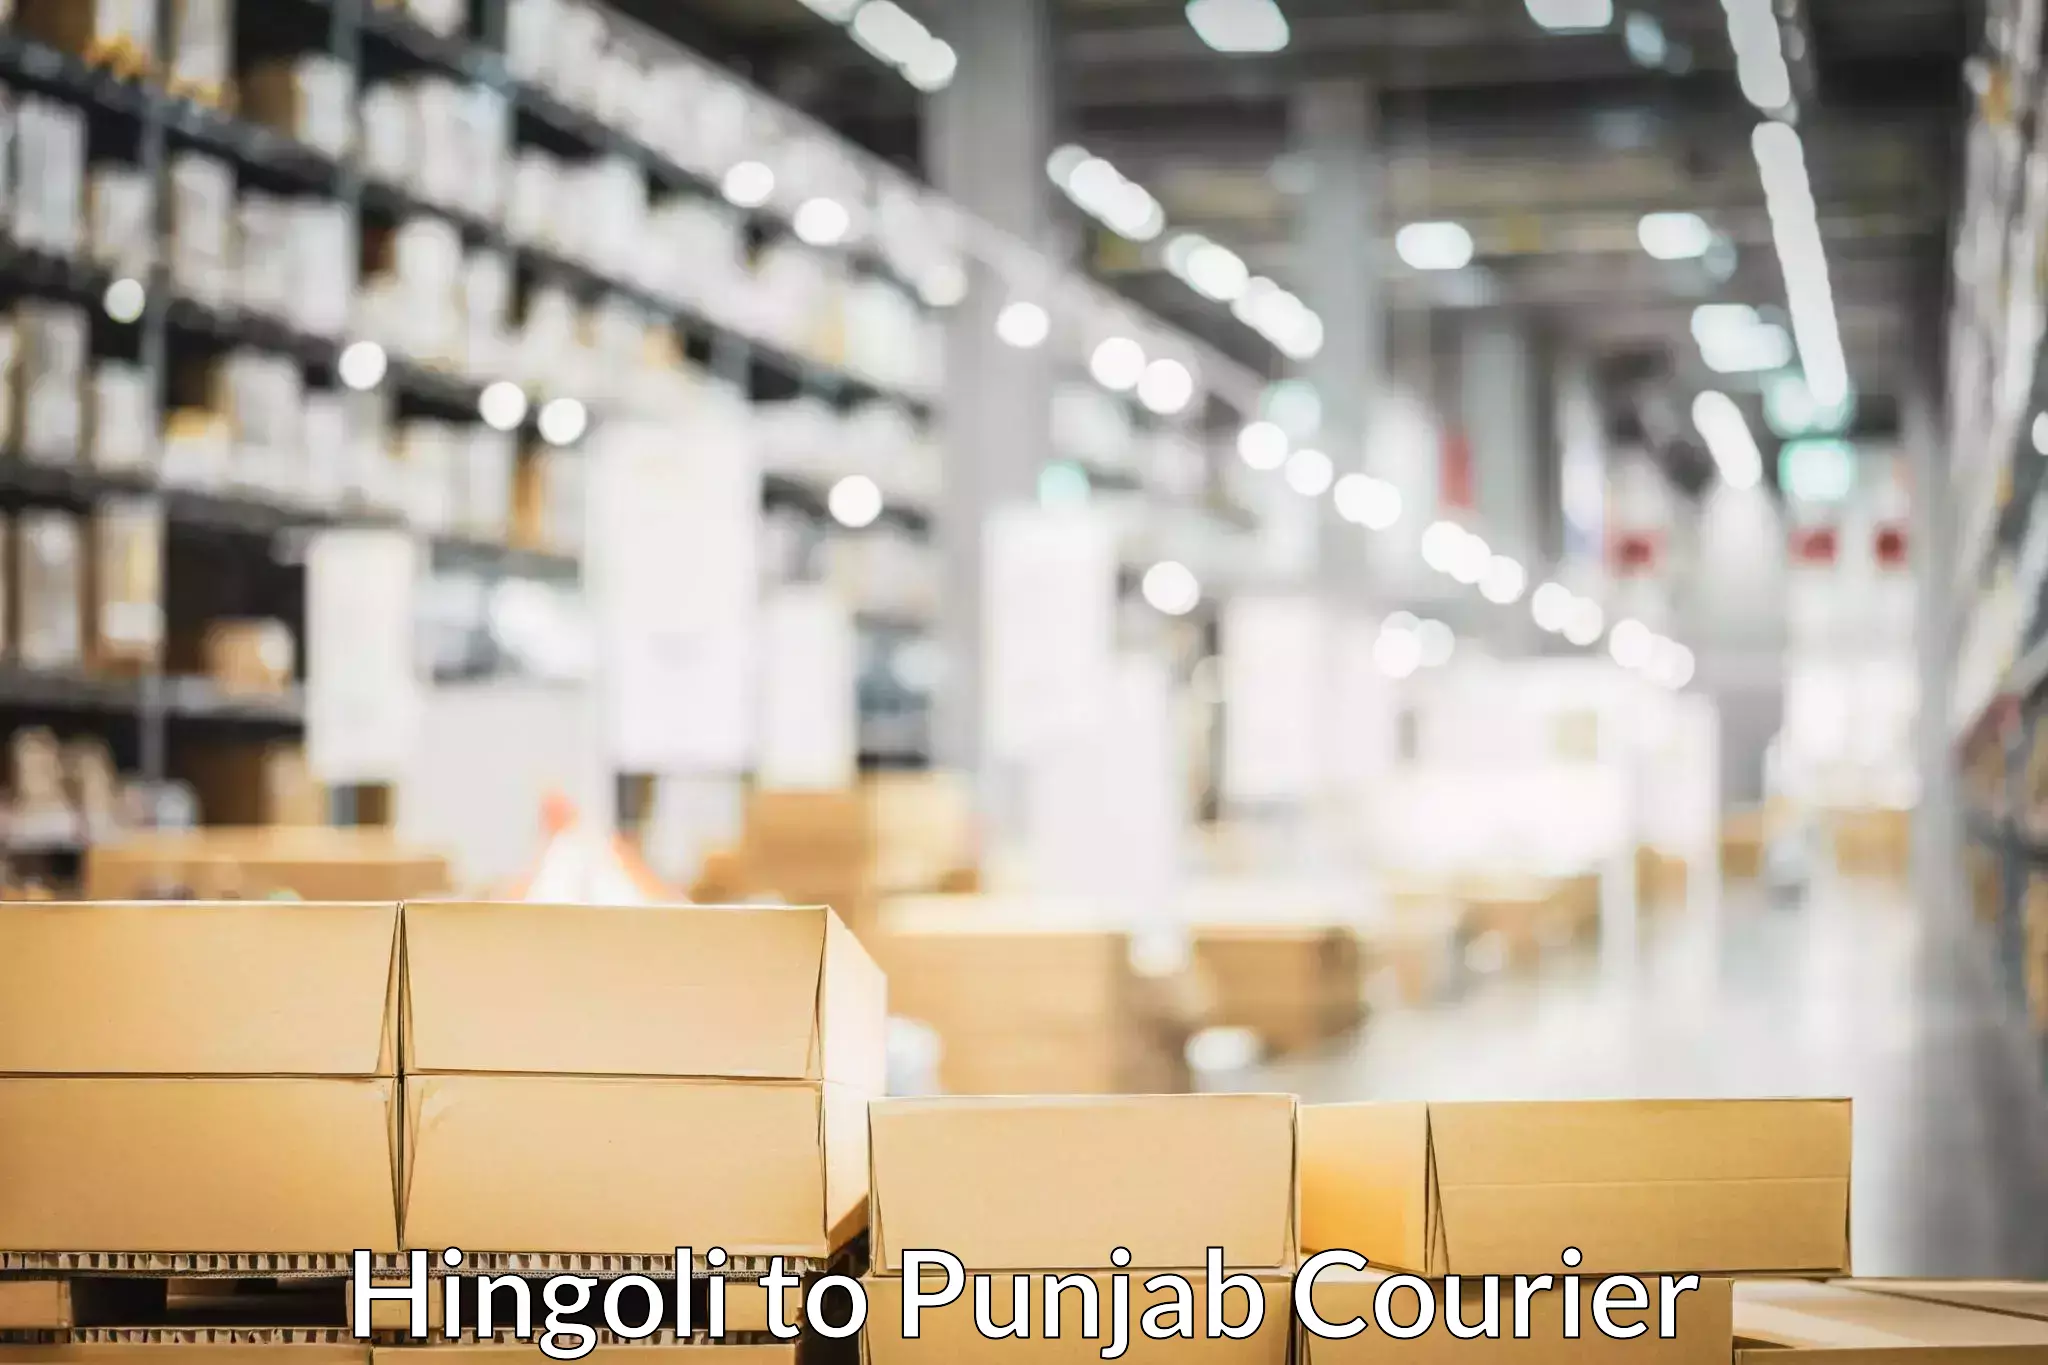 Furniture delivery service Hingoli to Punjab